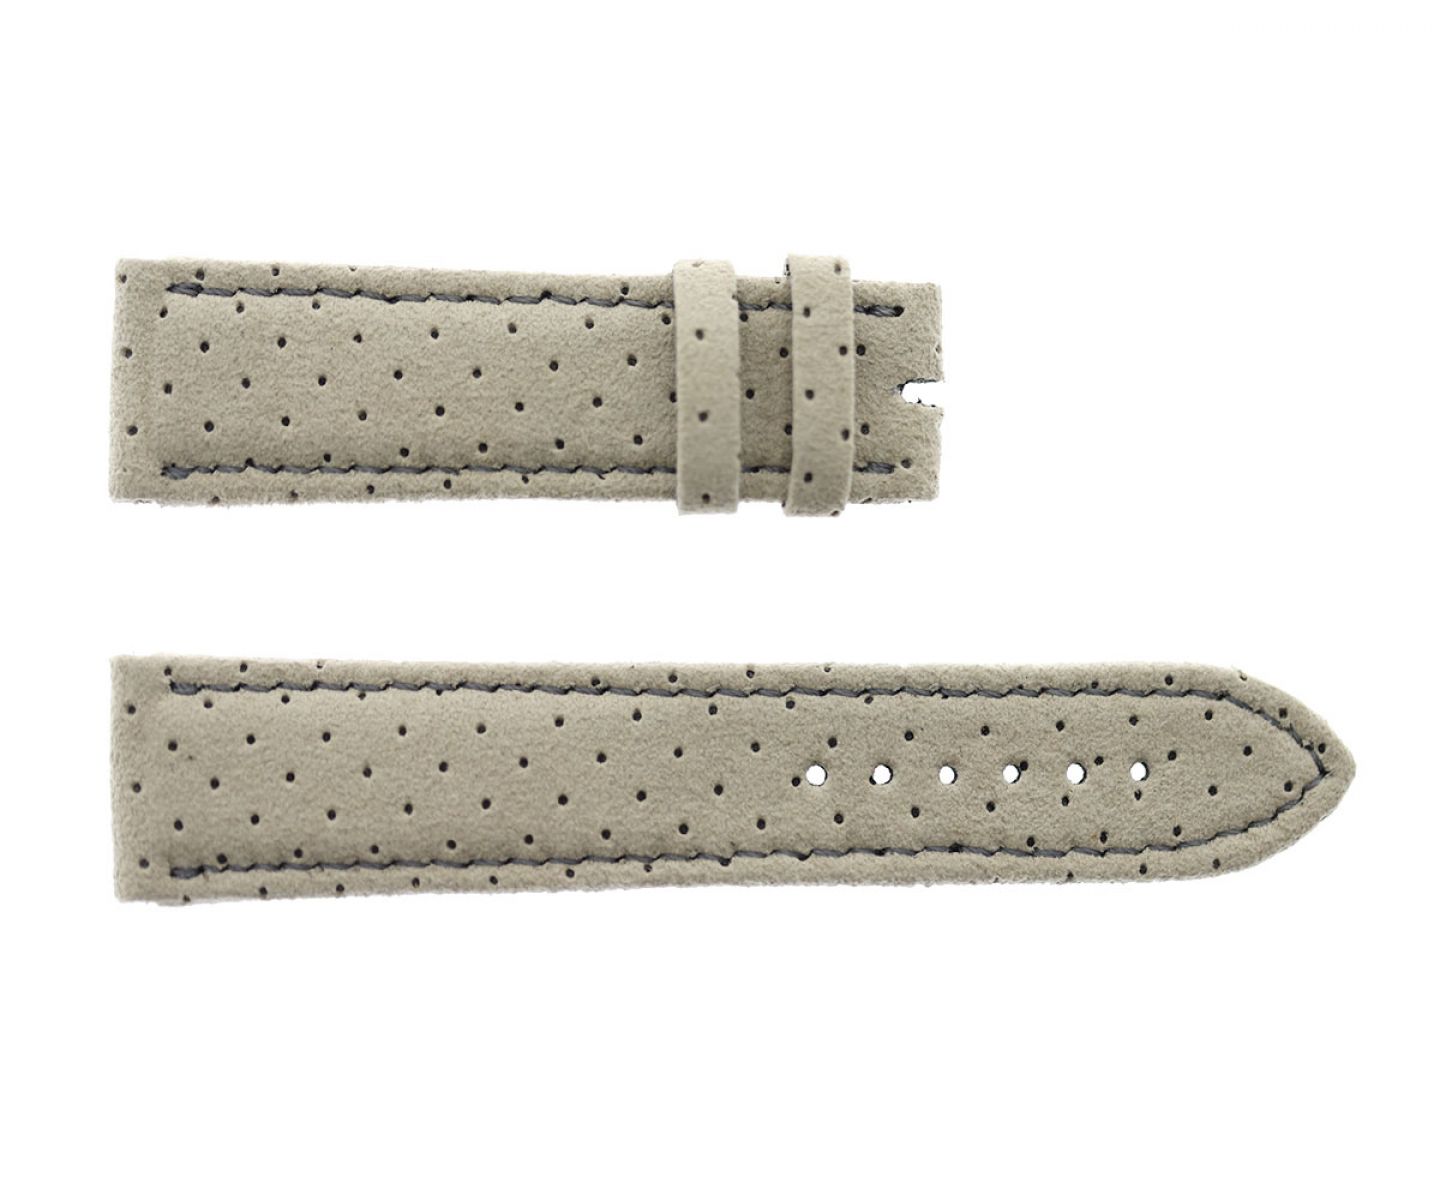 Beige Perforated Alcantara Strap 16mm, 18mm, 19mm, 20mm, 21mm, 22mm General style